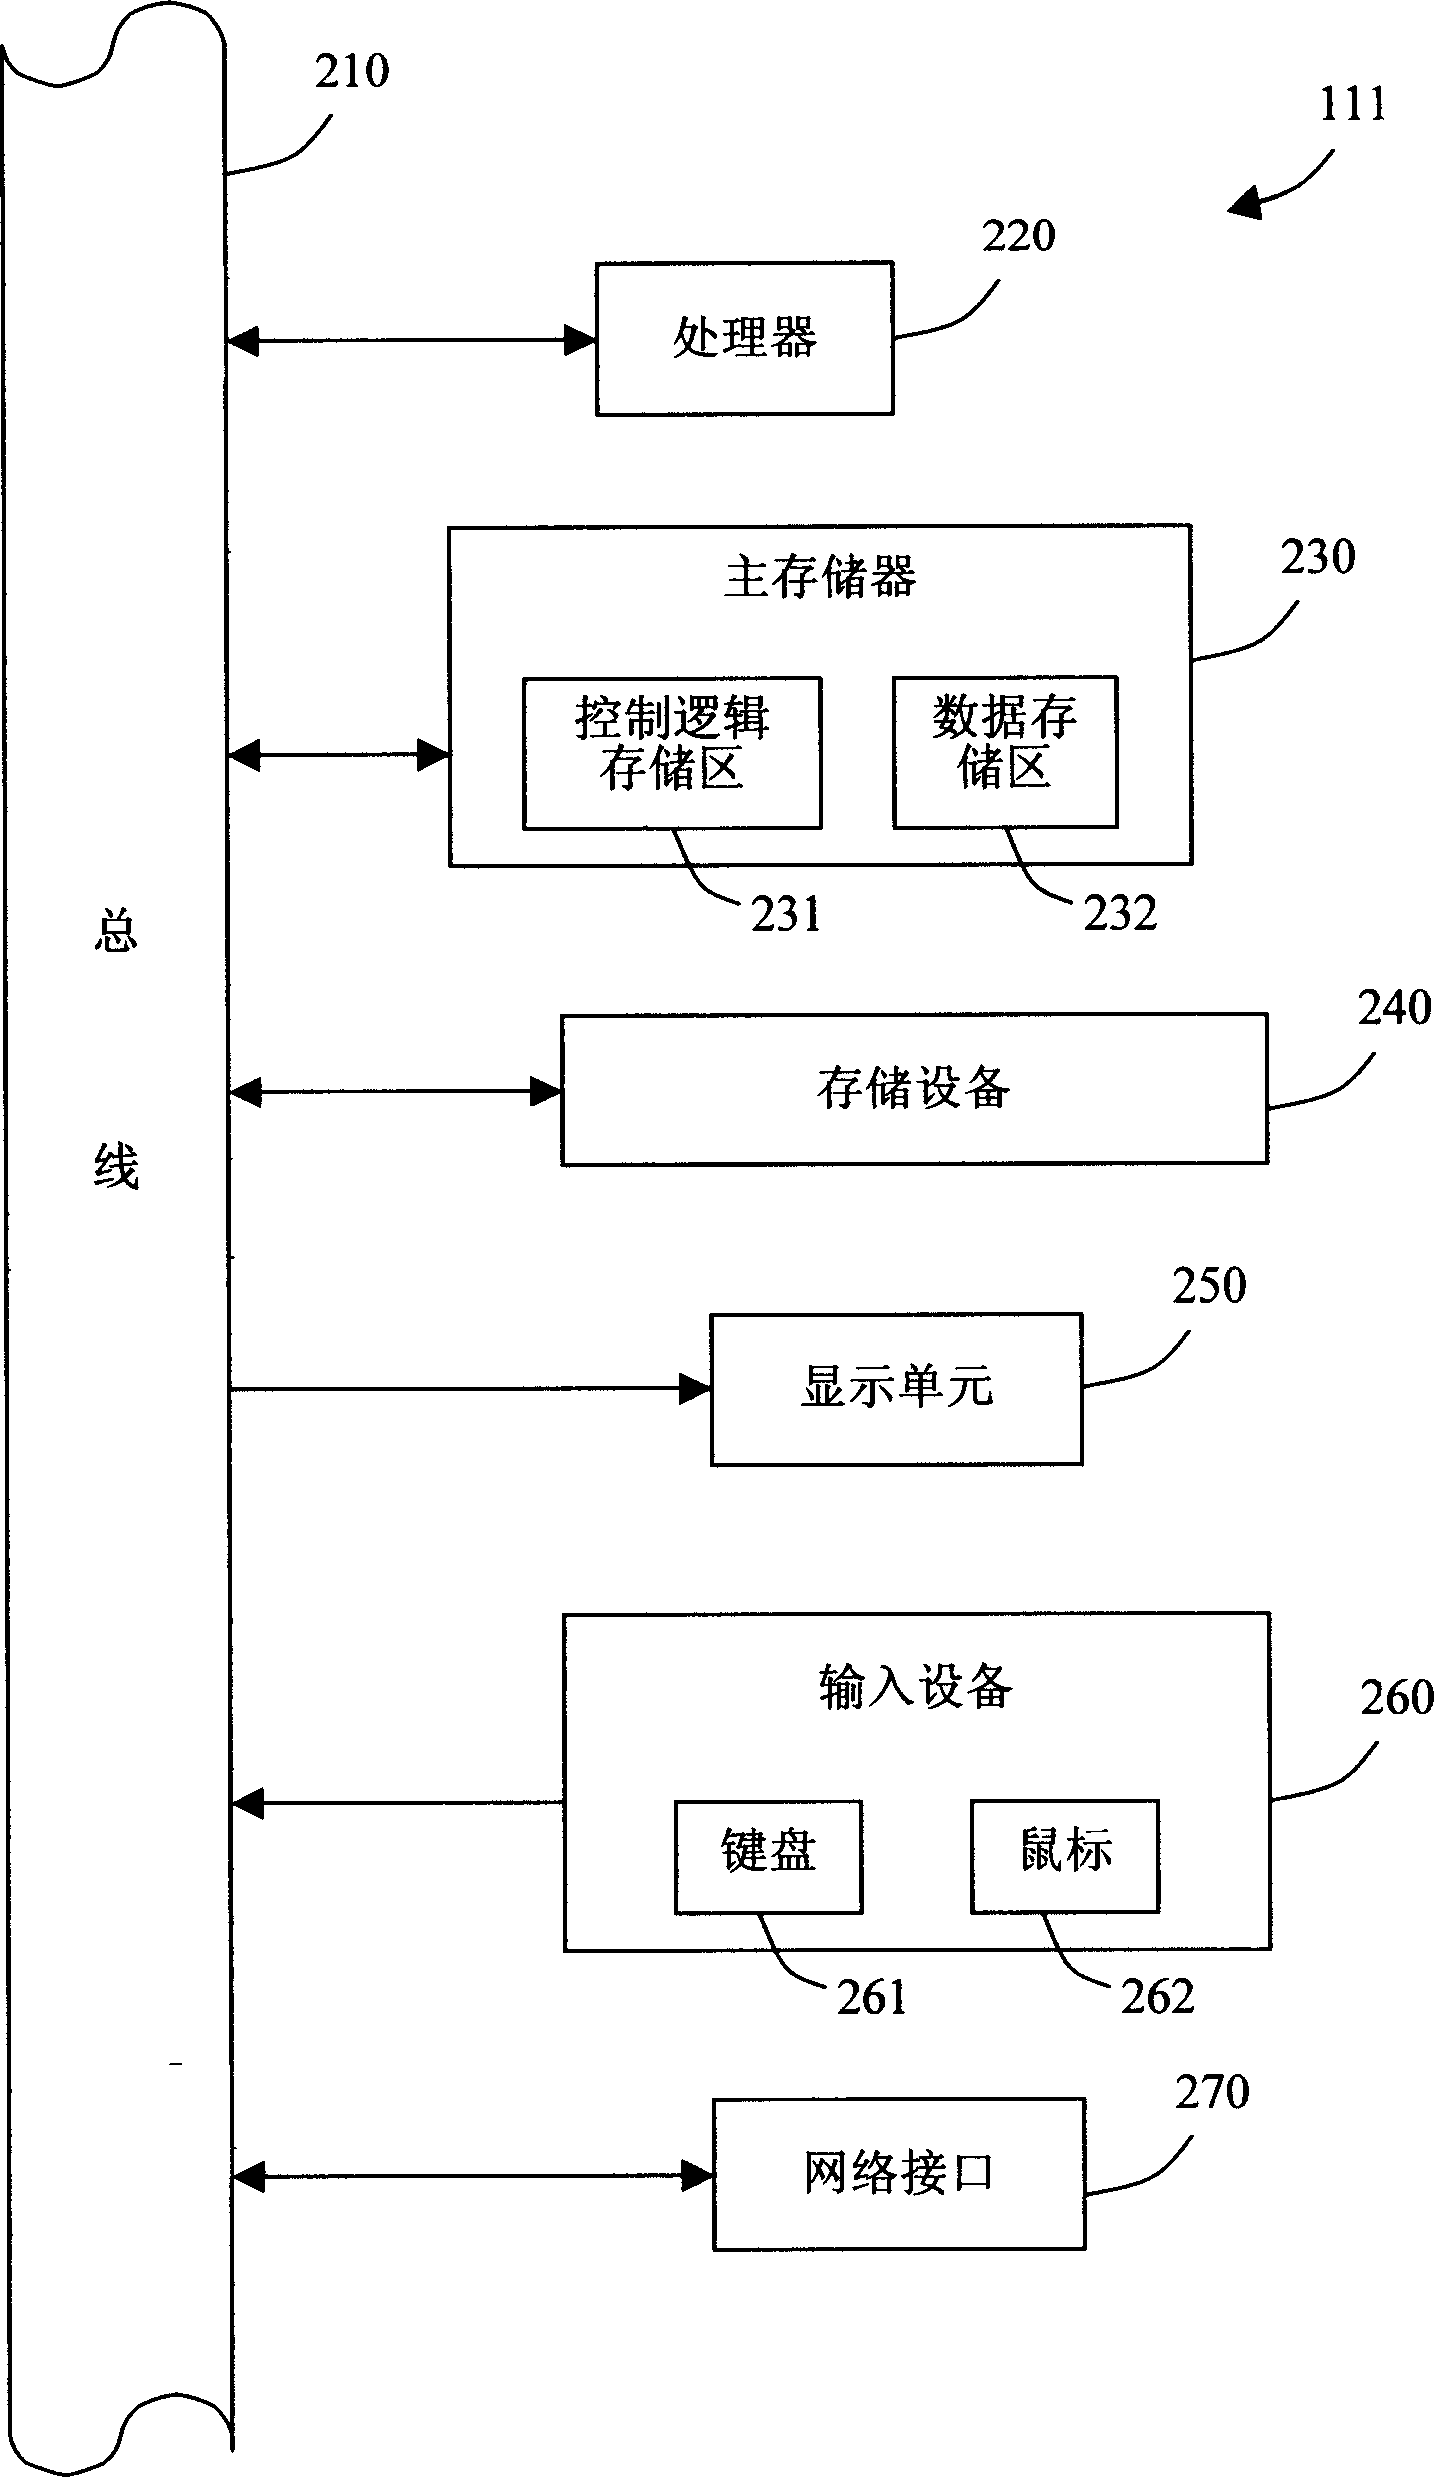 Patent analysis and demonstration system and method